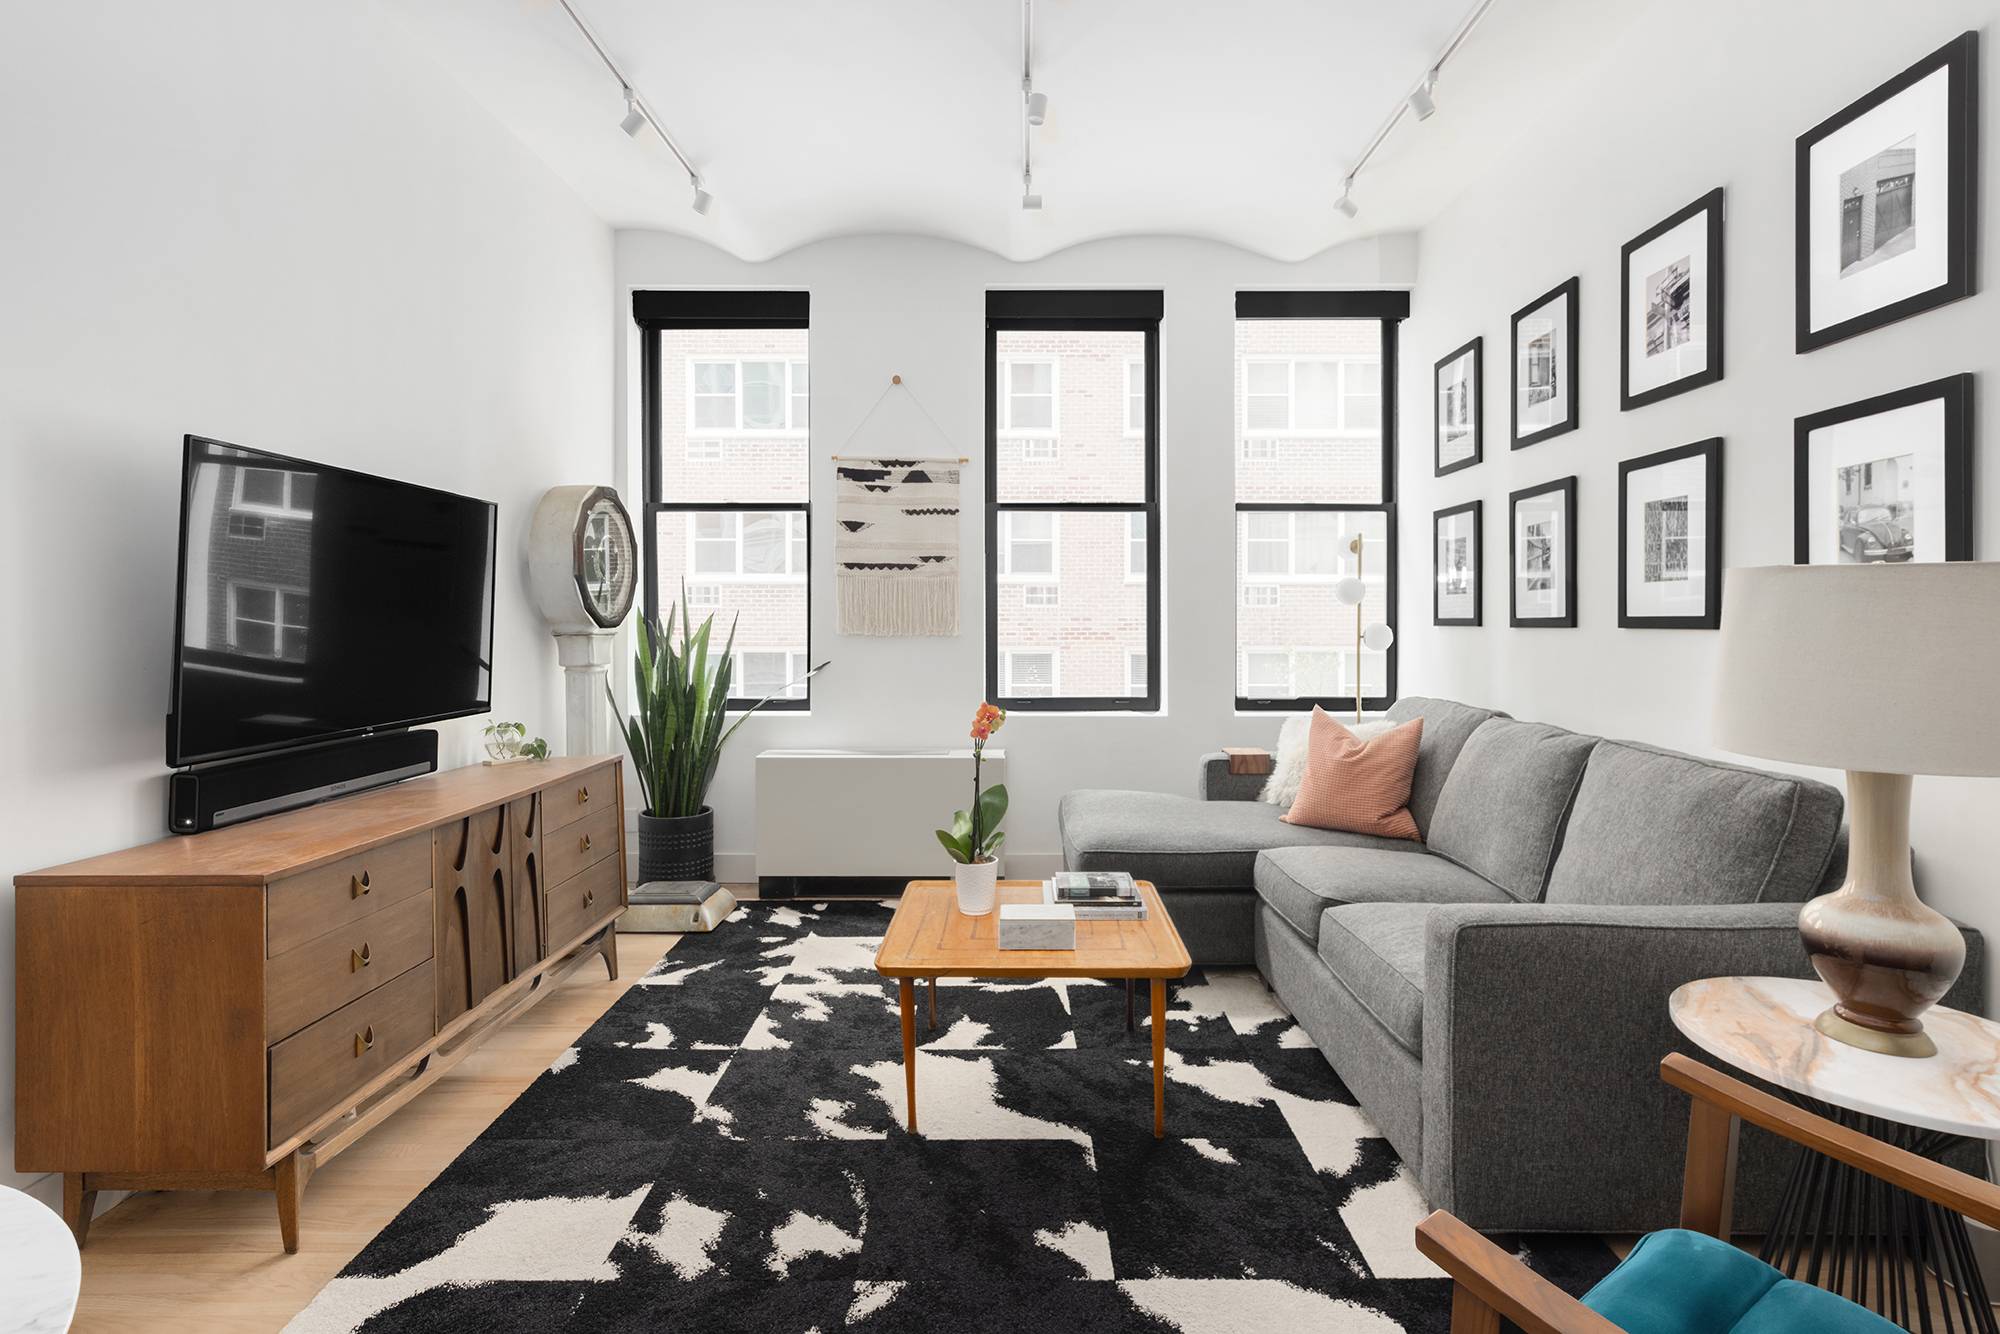 Welcome home to apartment 2D at The Hallanan, a meticulously renovated 2 bedroom located in the coveted West Village.